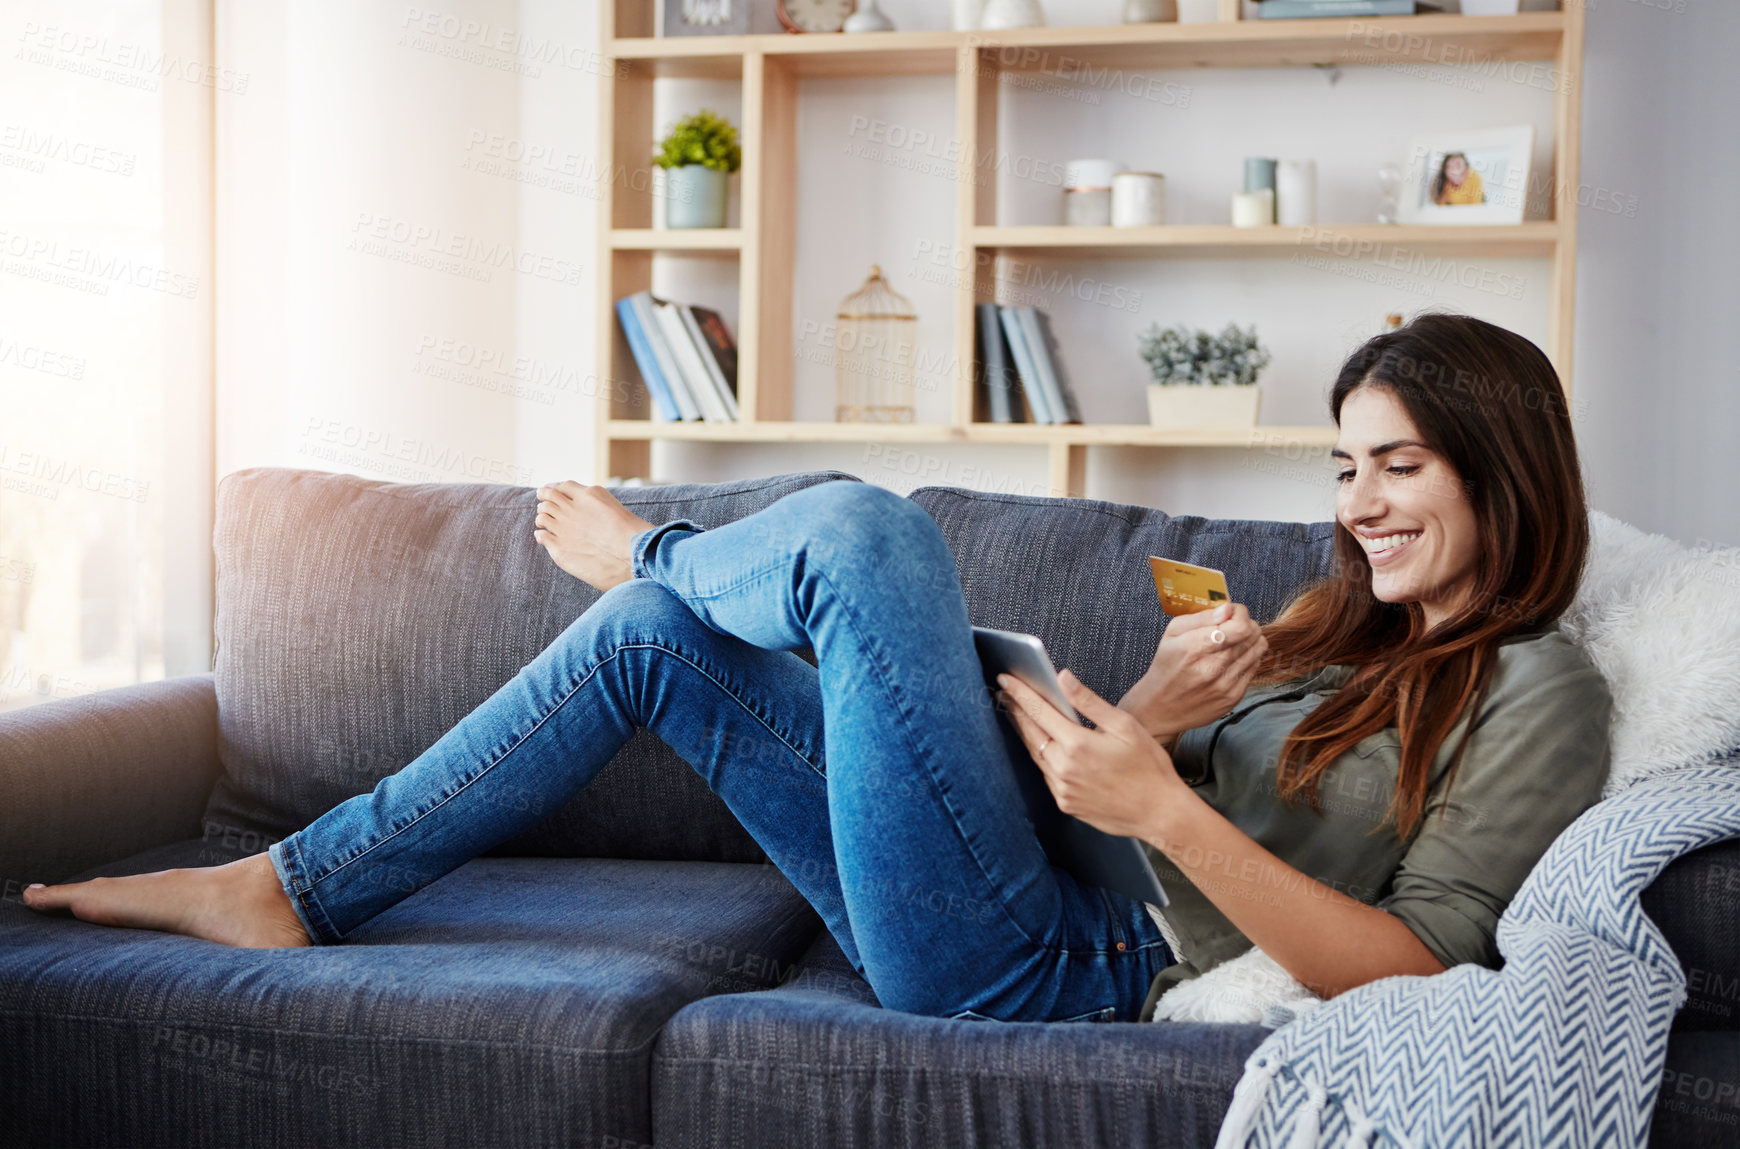 Buy stock photo Shot of a young doing online shopping while relaxing on her couch at home